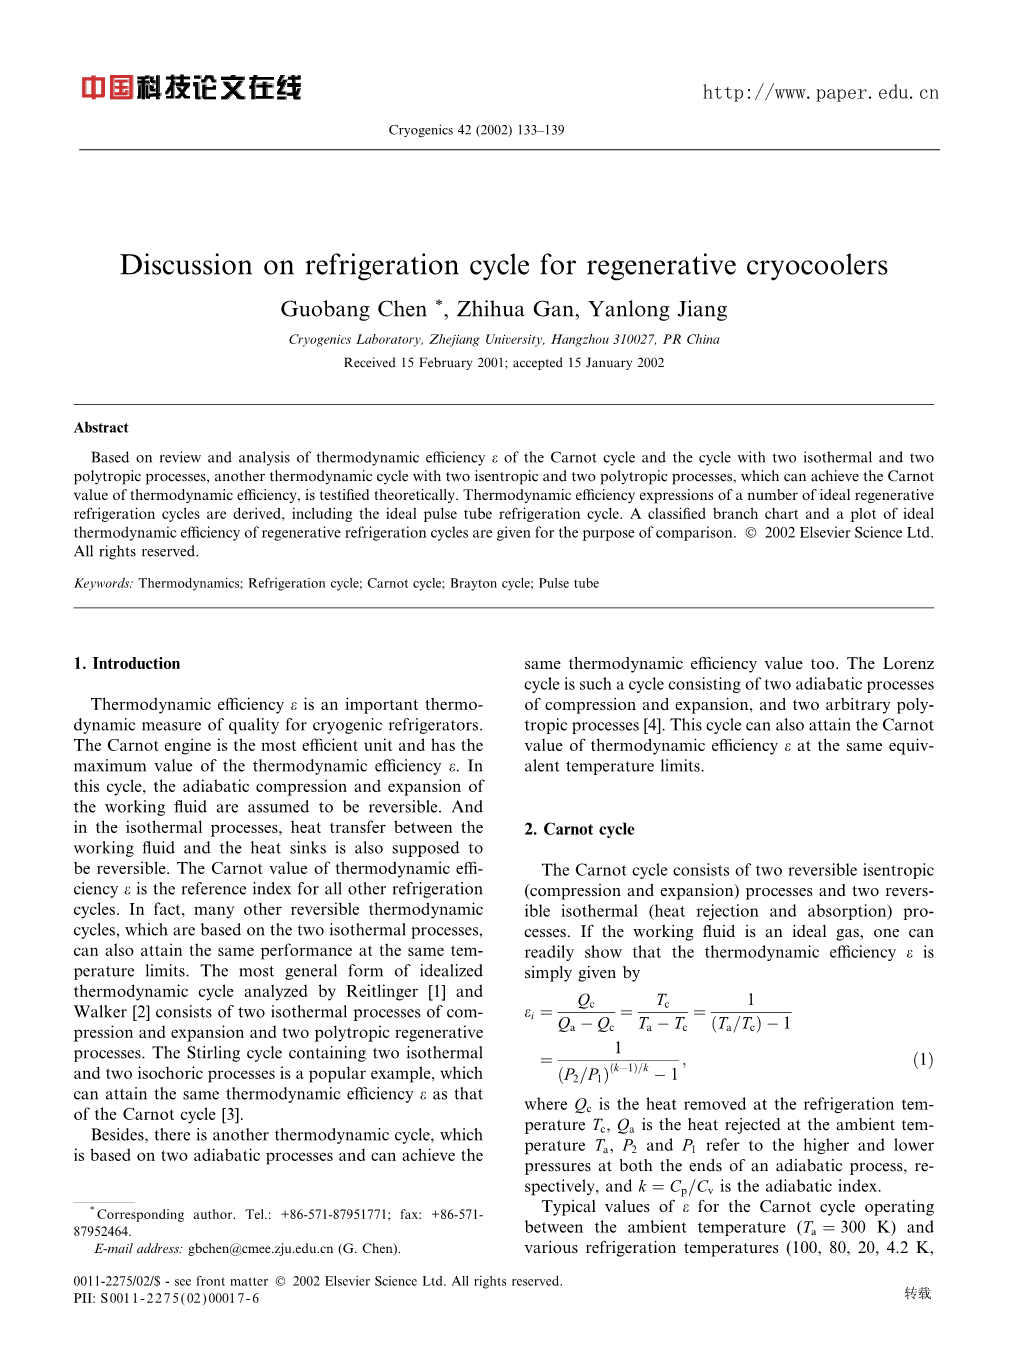 Discussion on Refrigeration Cycle for Regenerative Cryocoolers